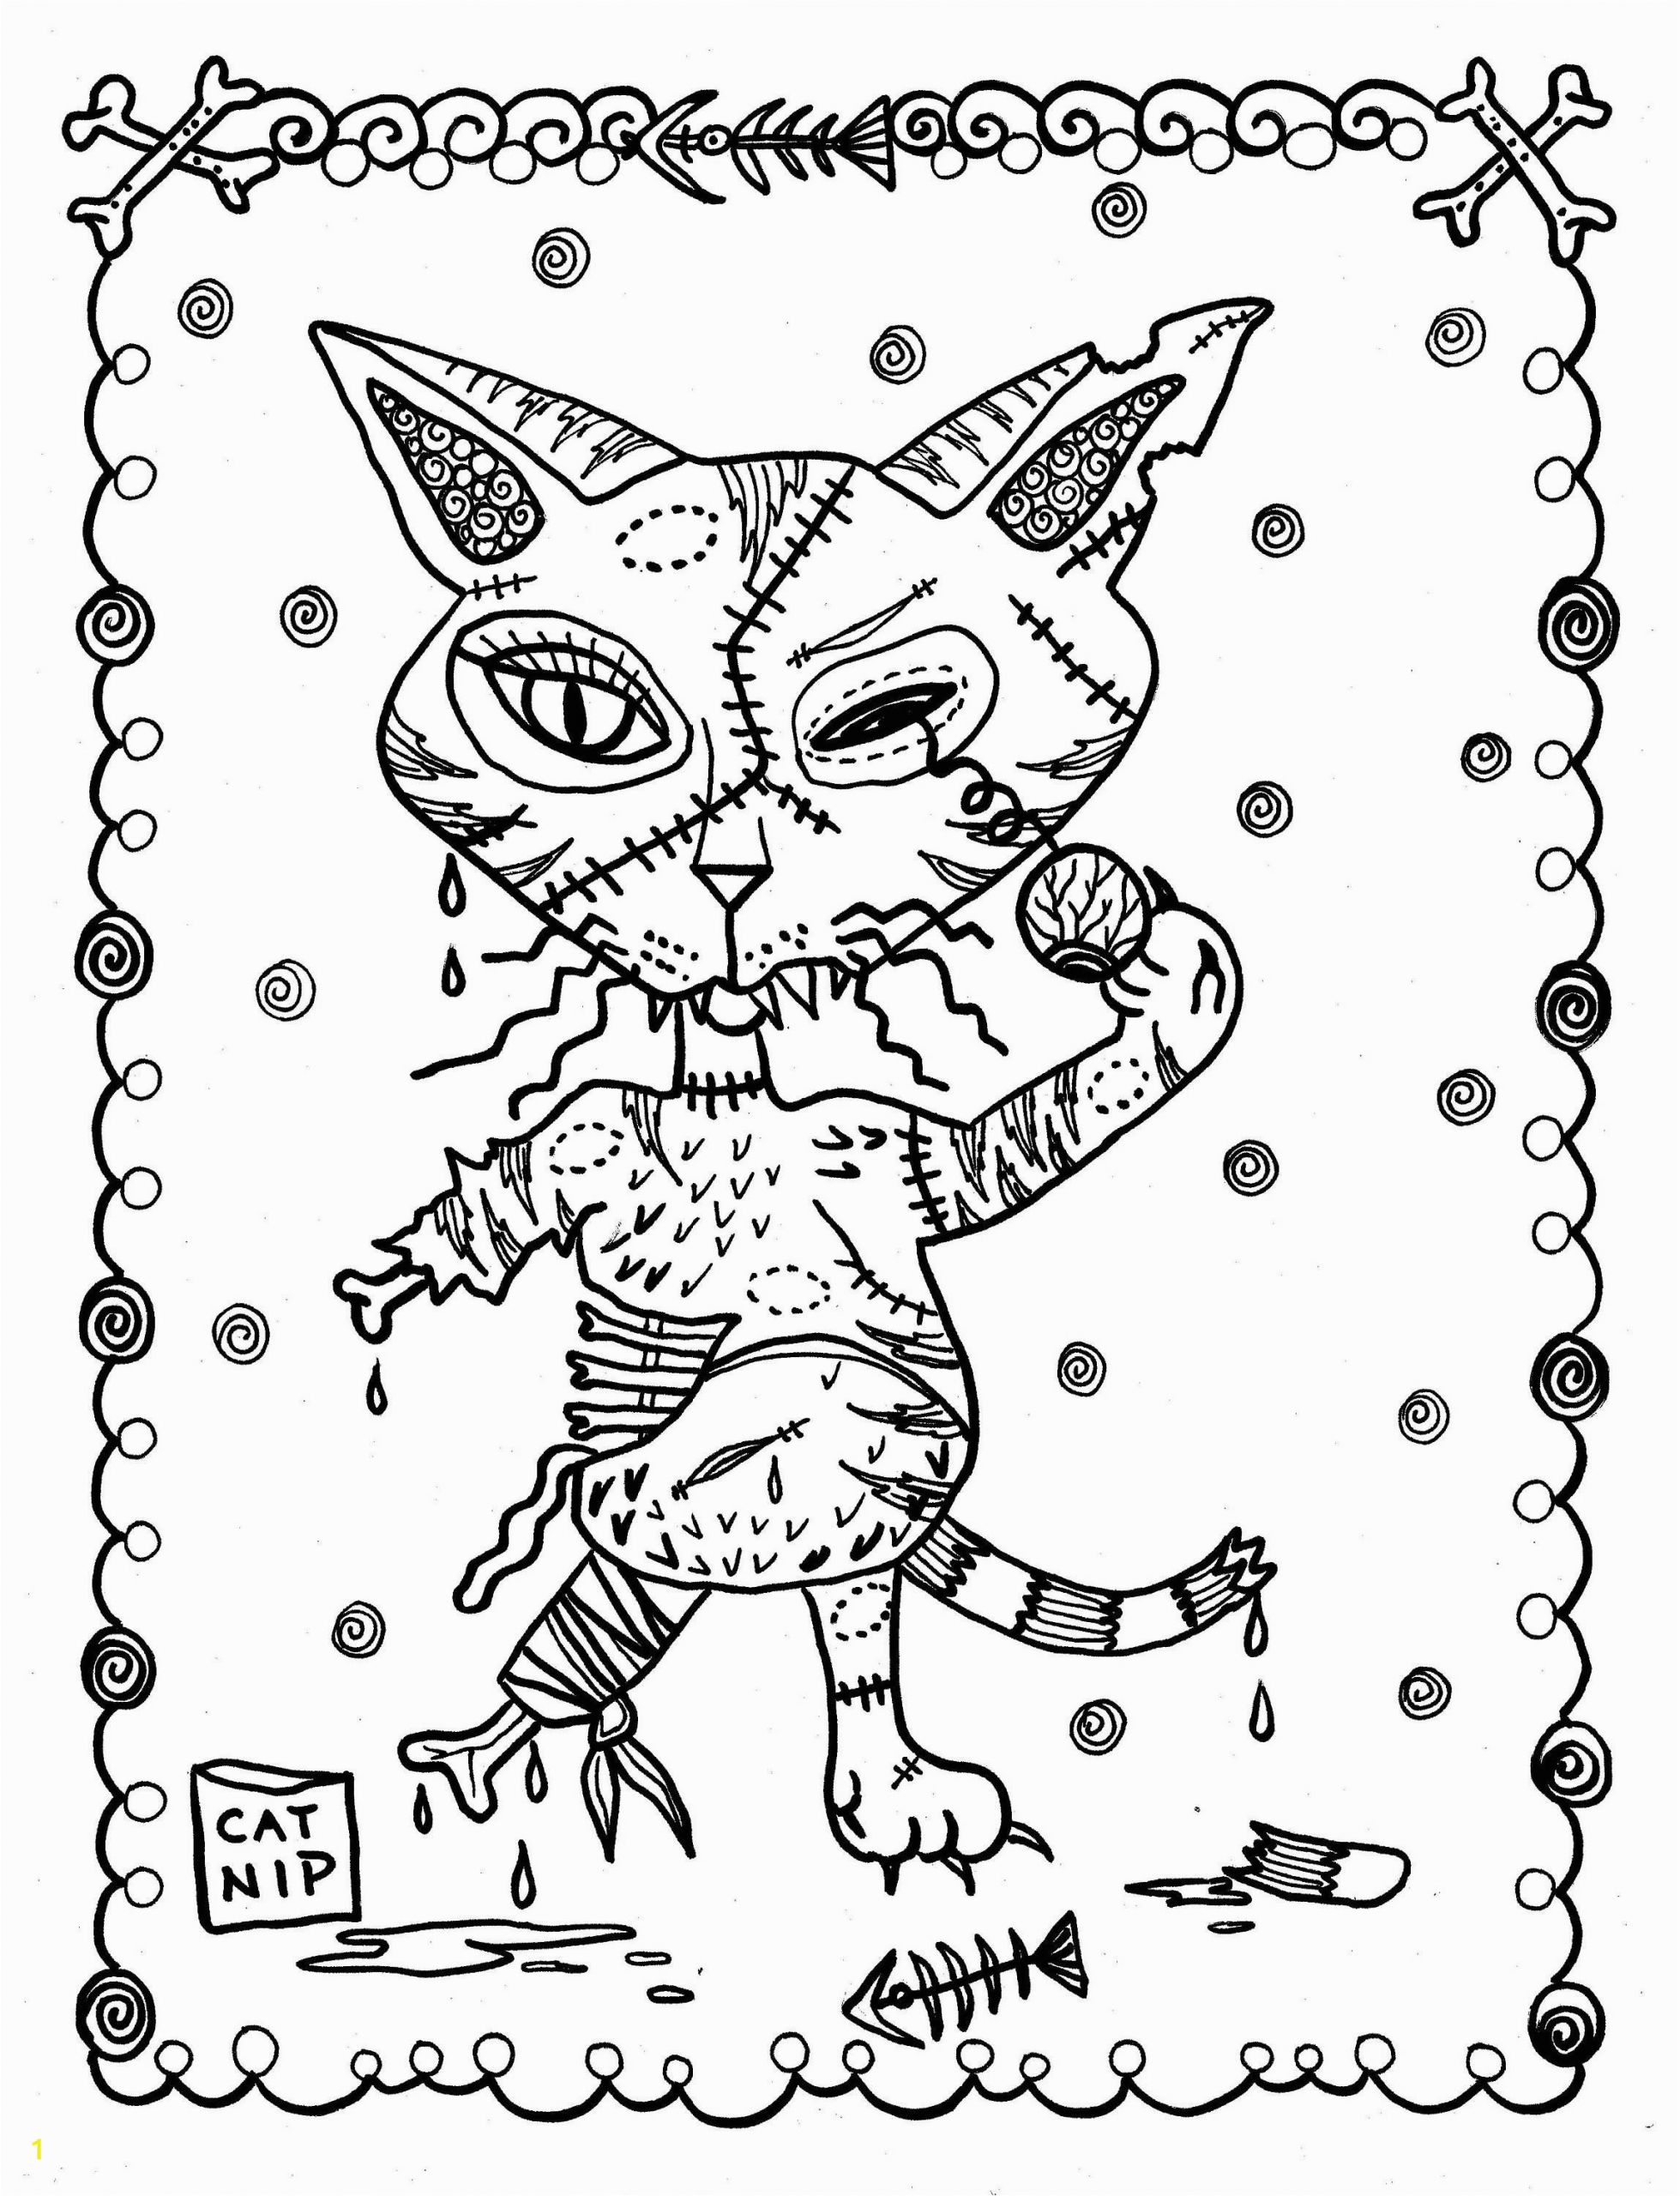 Halloween Horror Coloring Pages 5 Pages Fantasy Cats Instant S Scarry Halloween